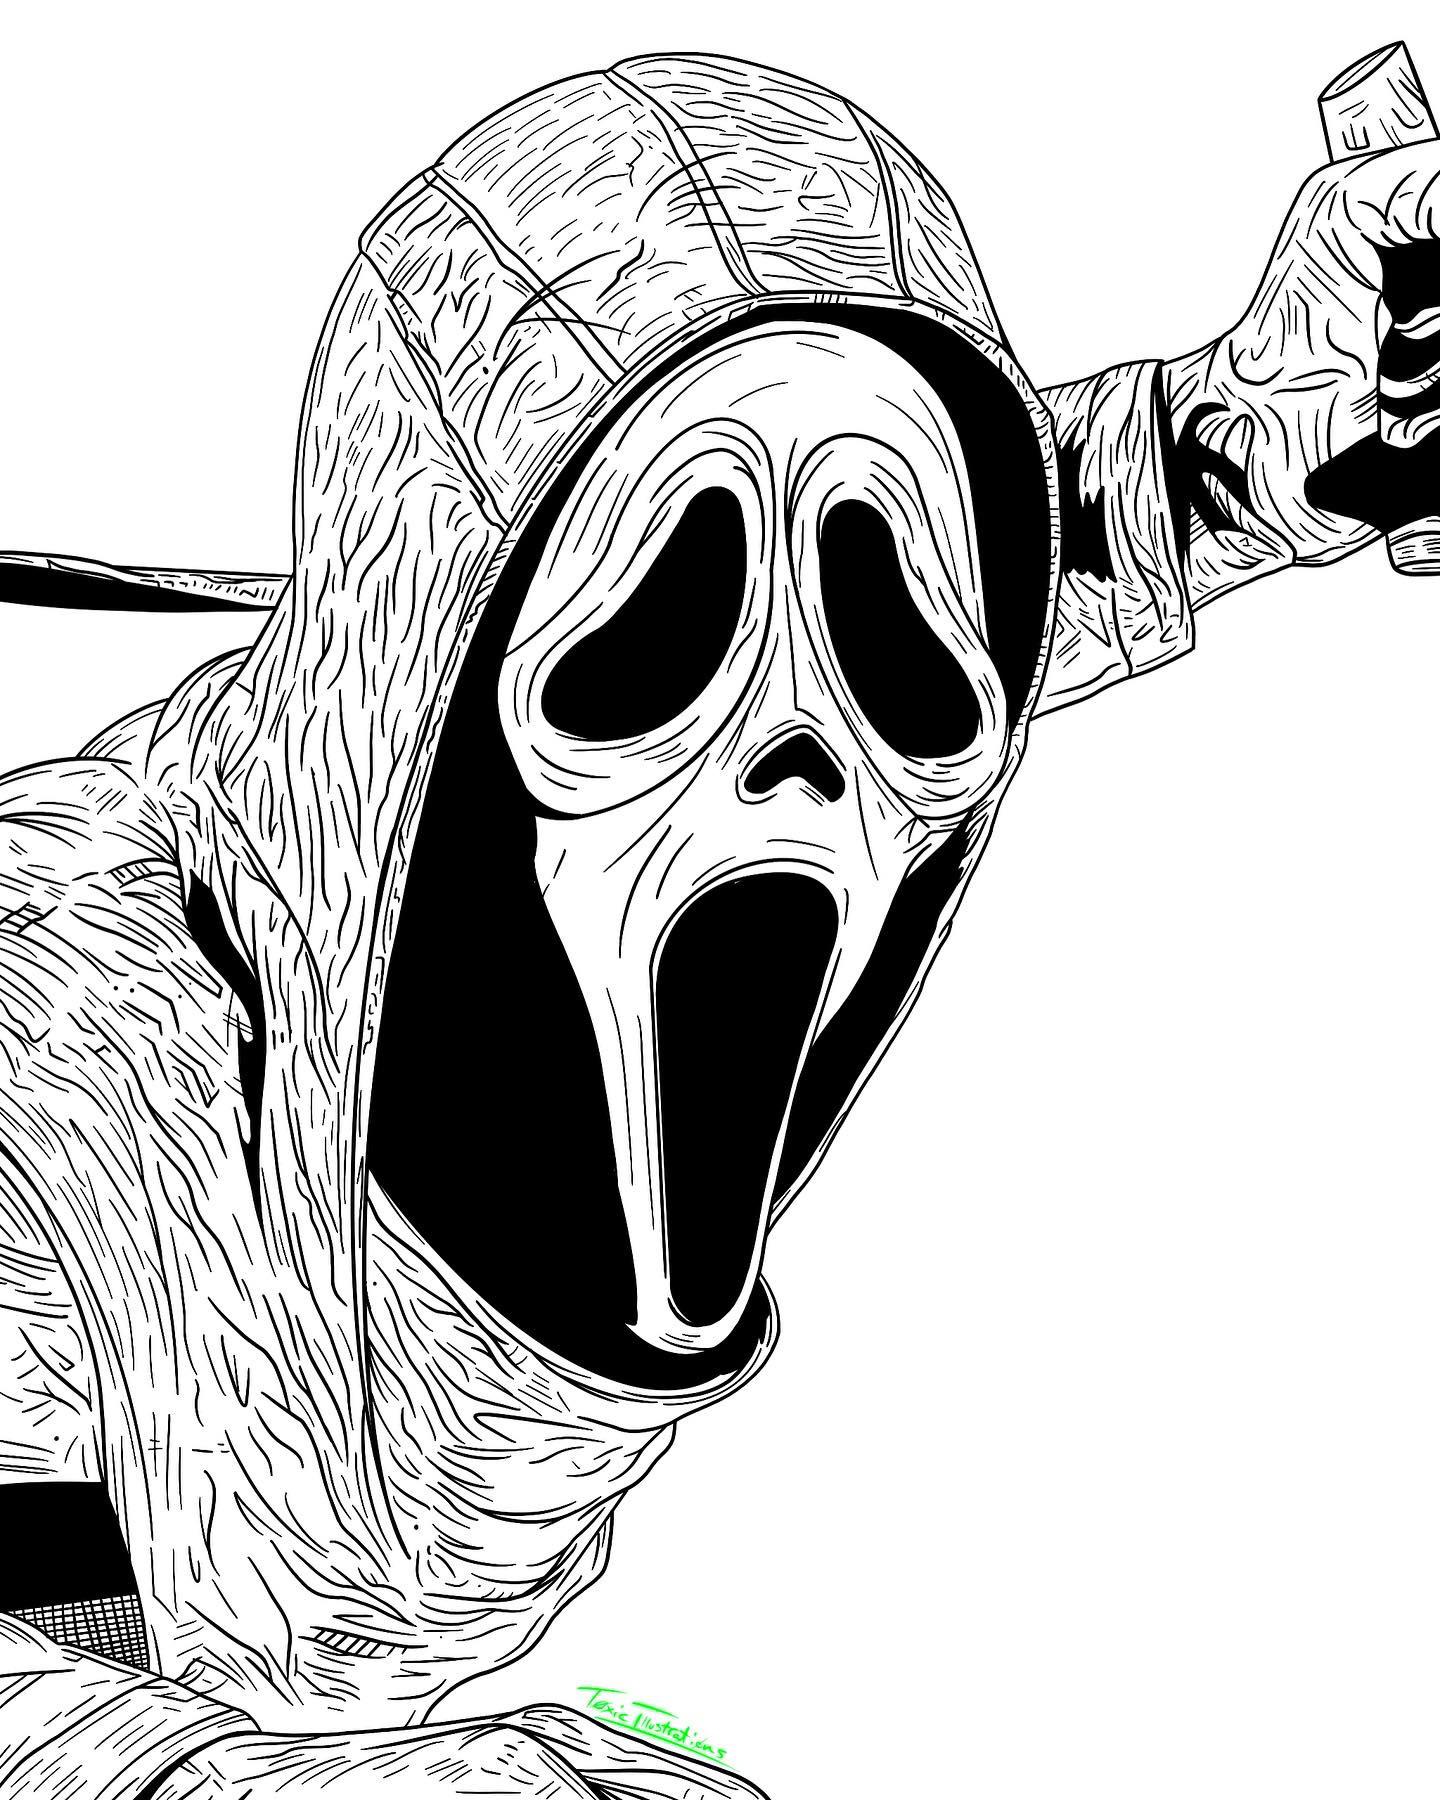 Also done a drawing of ghostface from the dbd poster hope you enjoy rdeadbydaylight